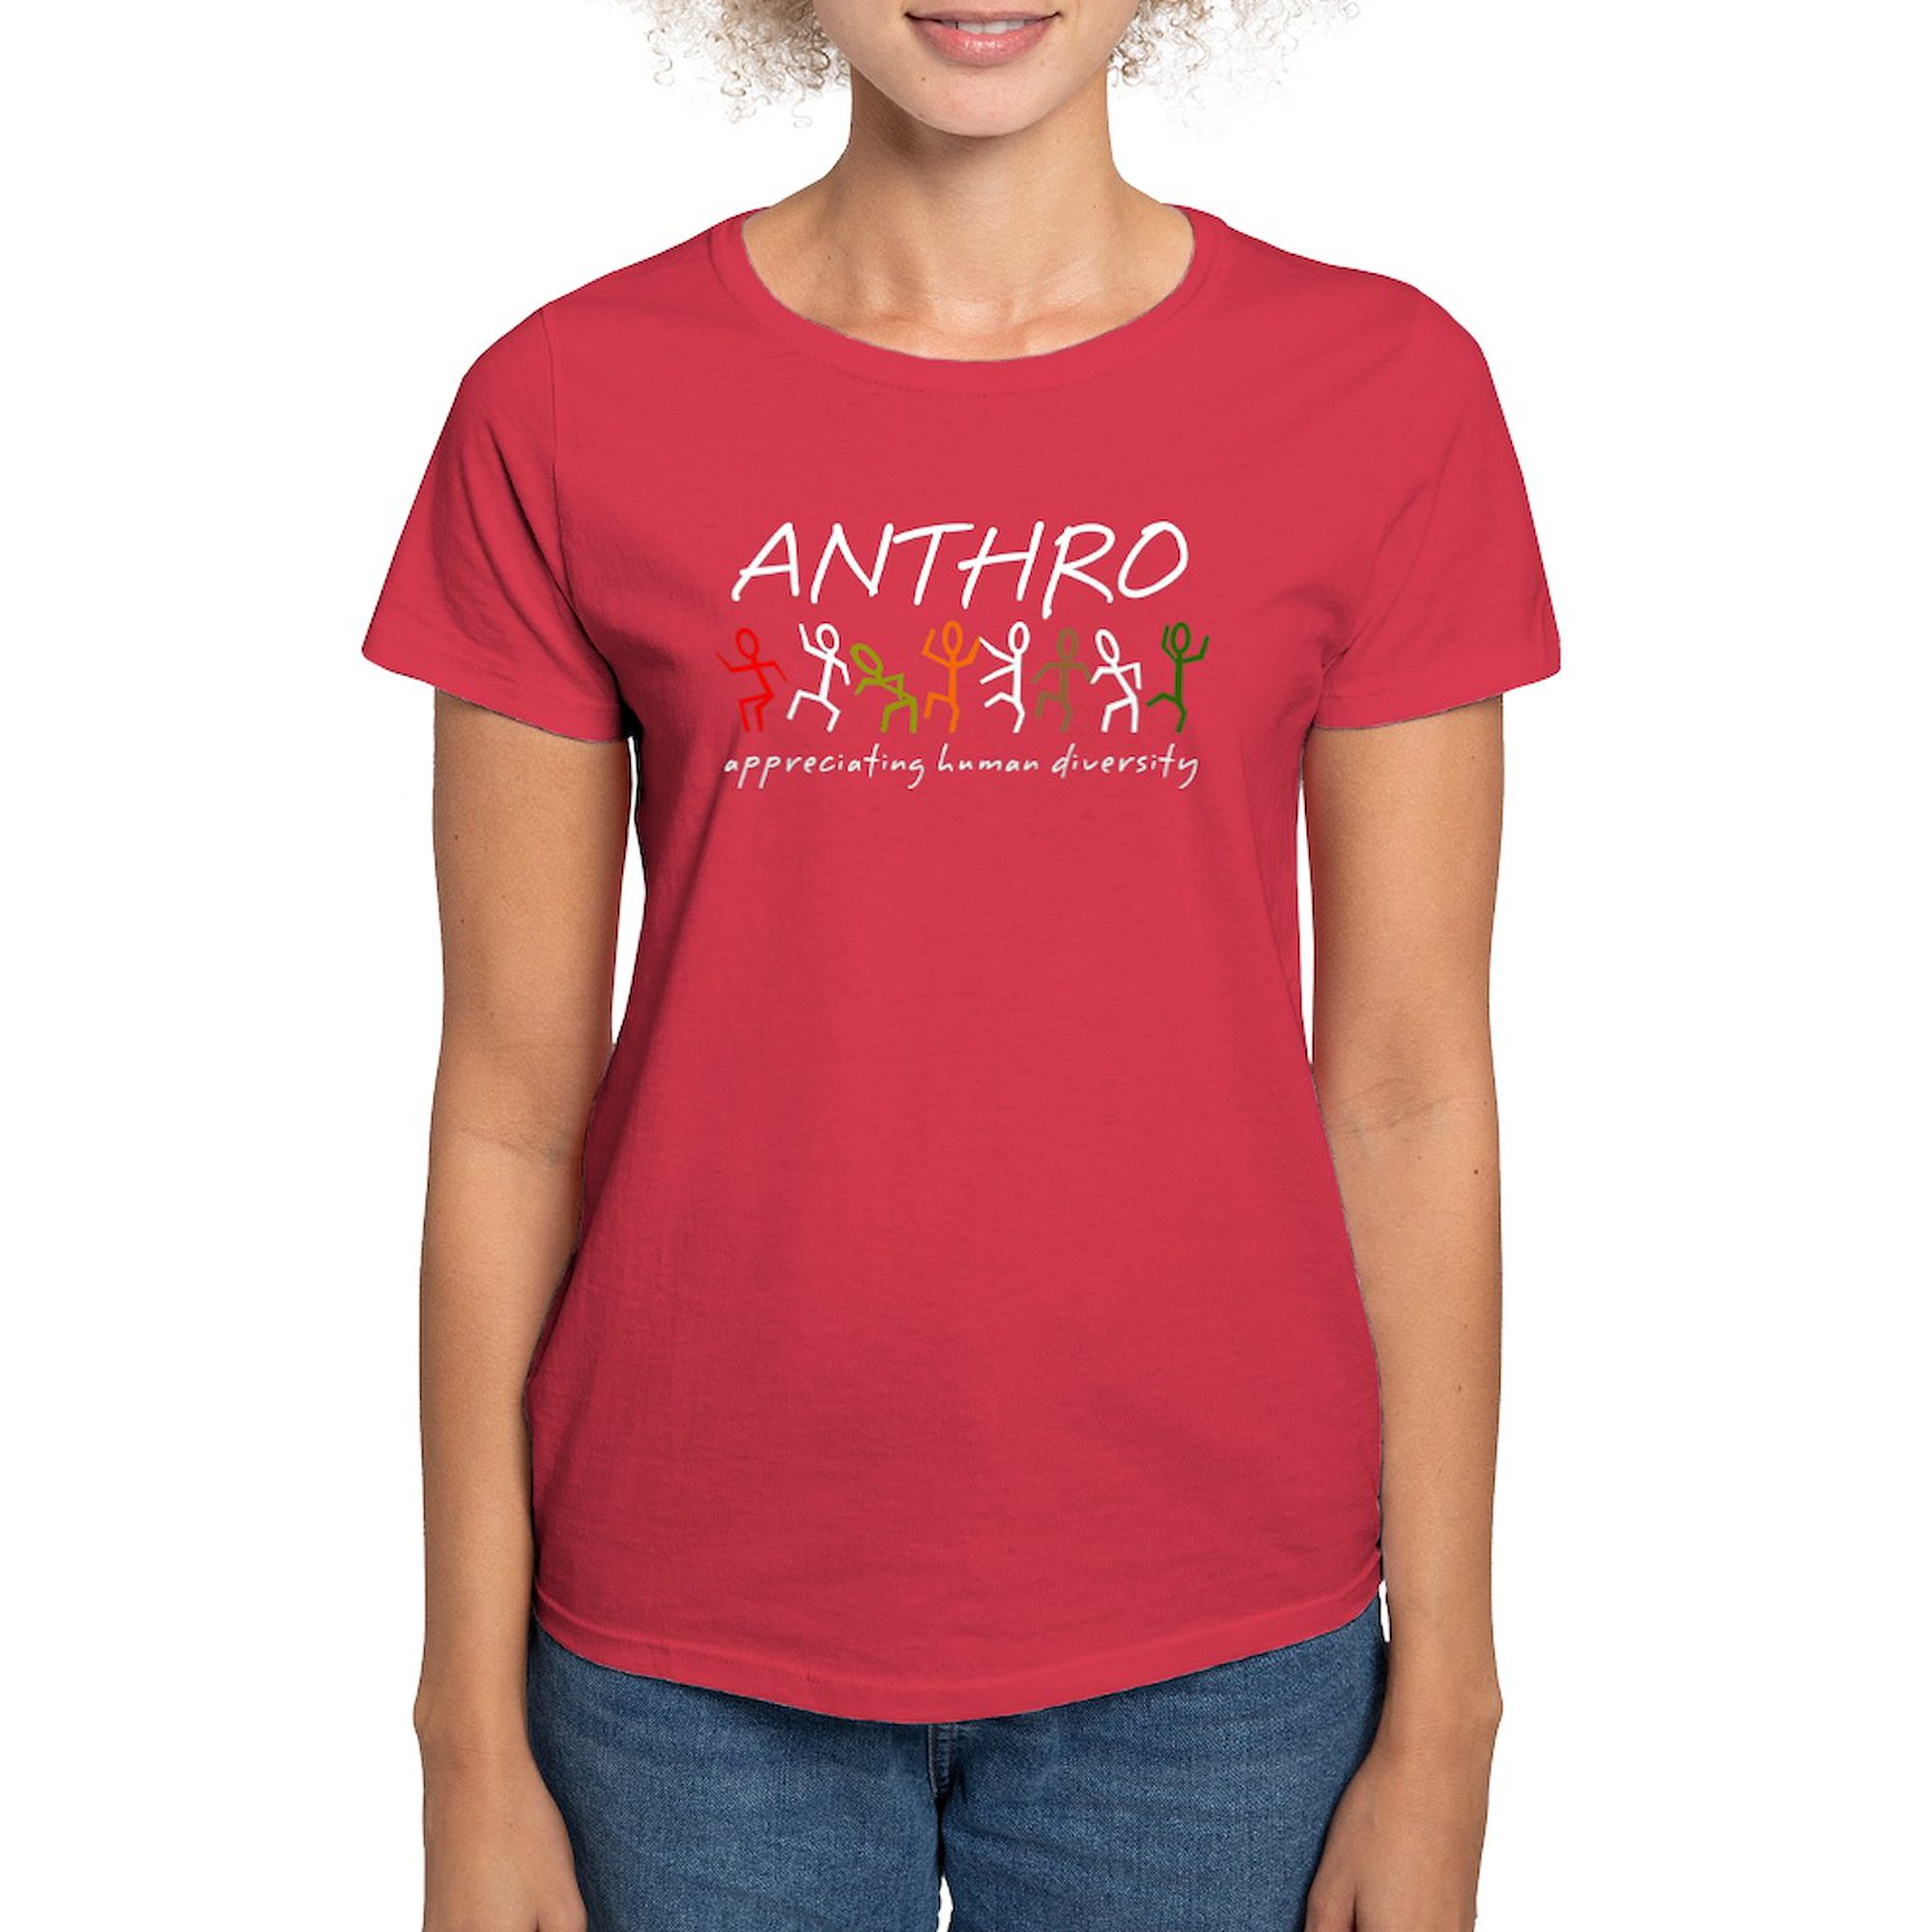 CafePress - Anthro1 T Shirt - Women's Traditional Fit Dark T-Shirt - image 1 of 4